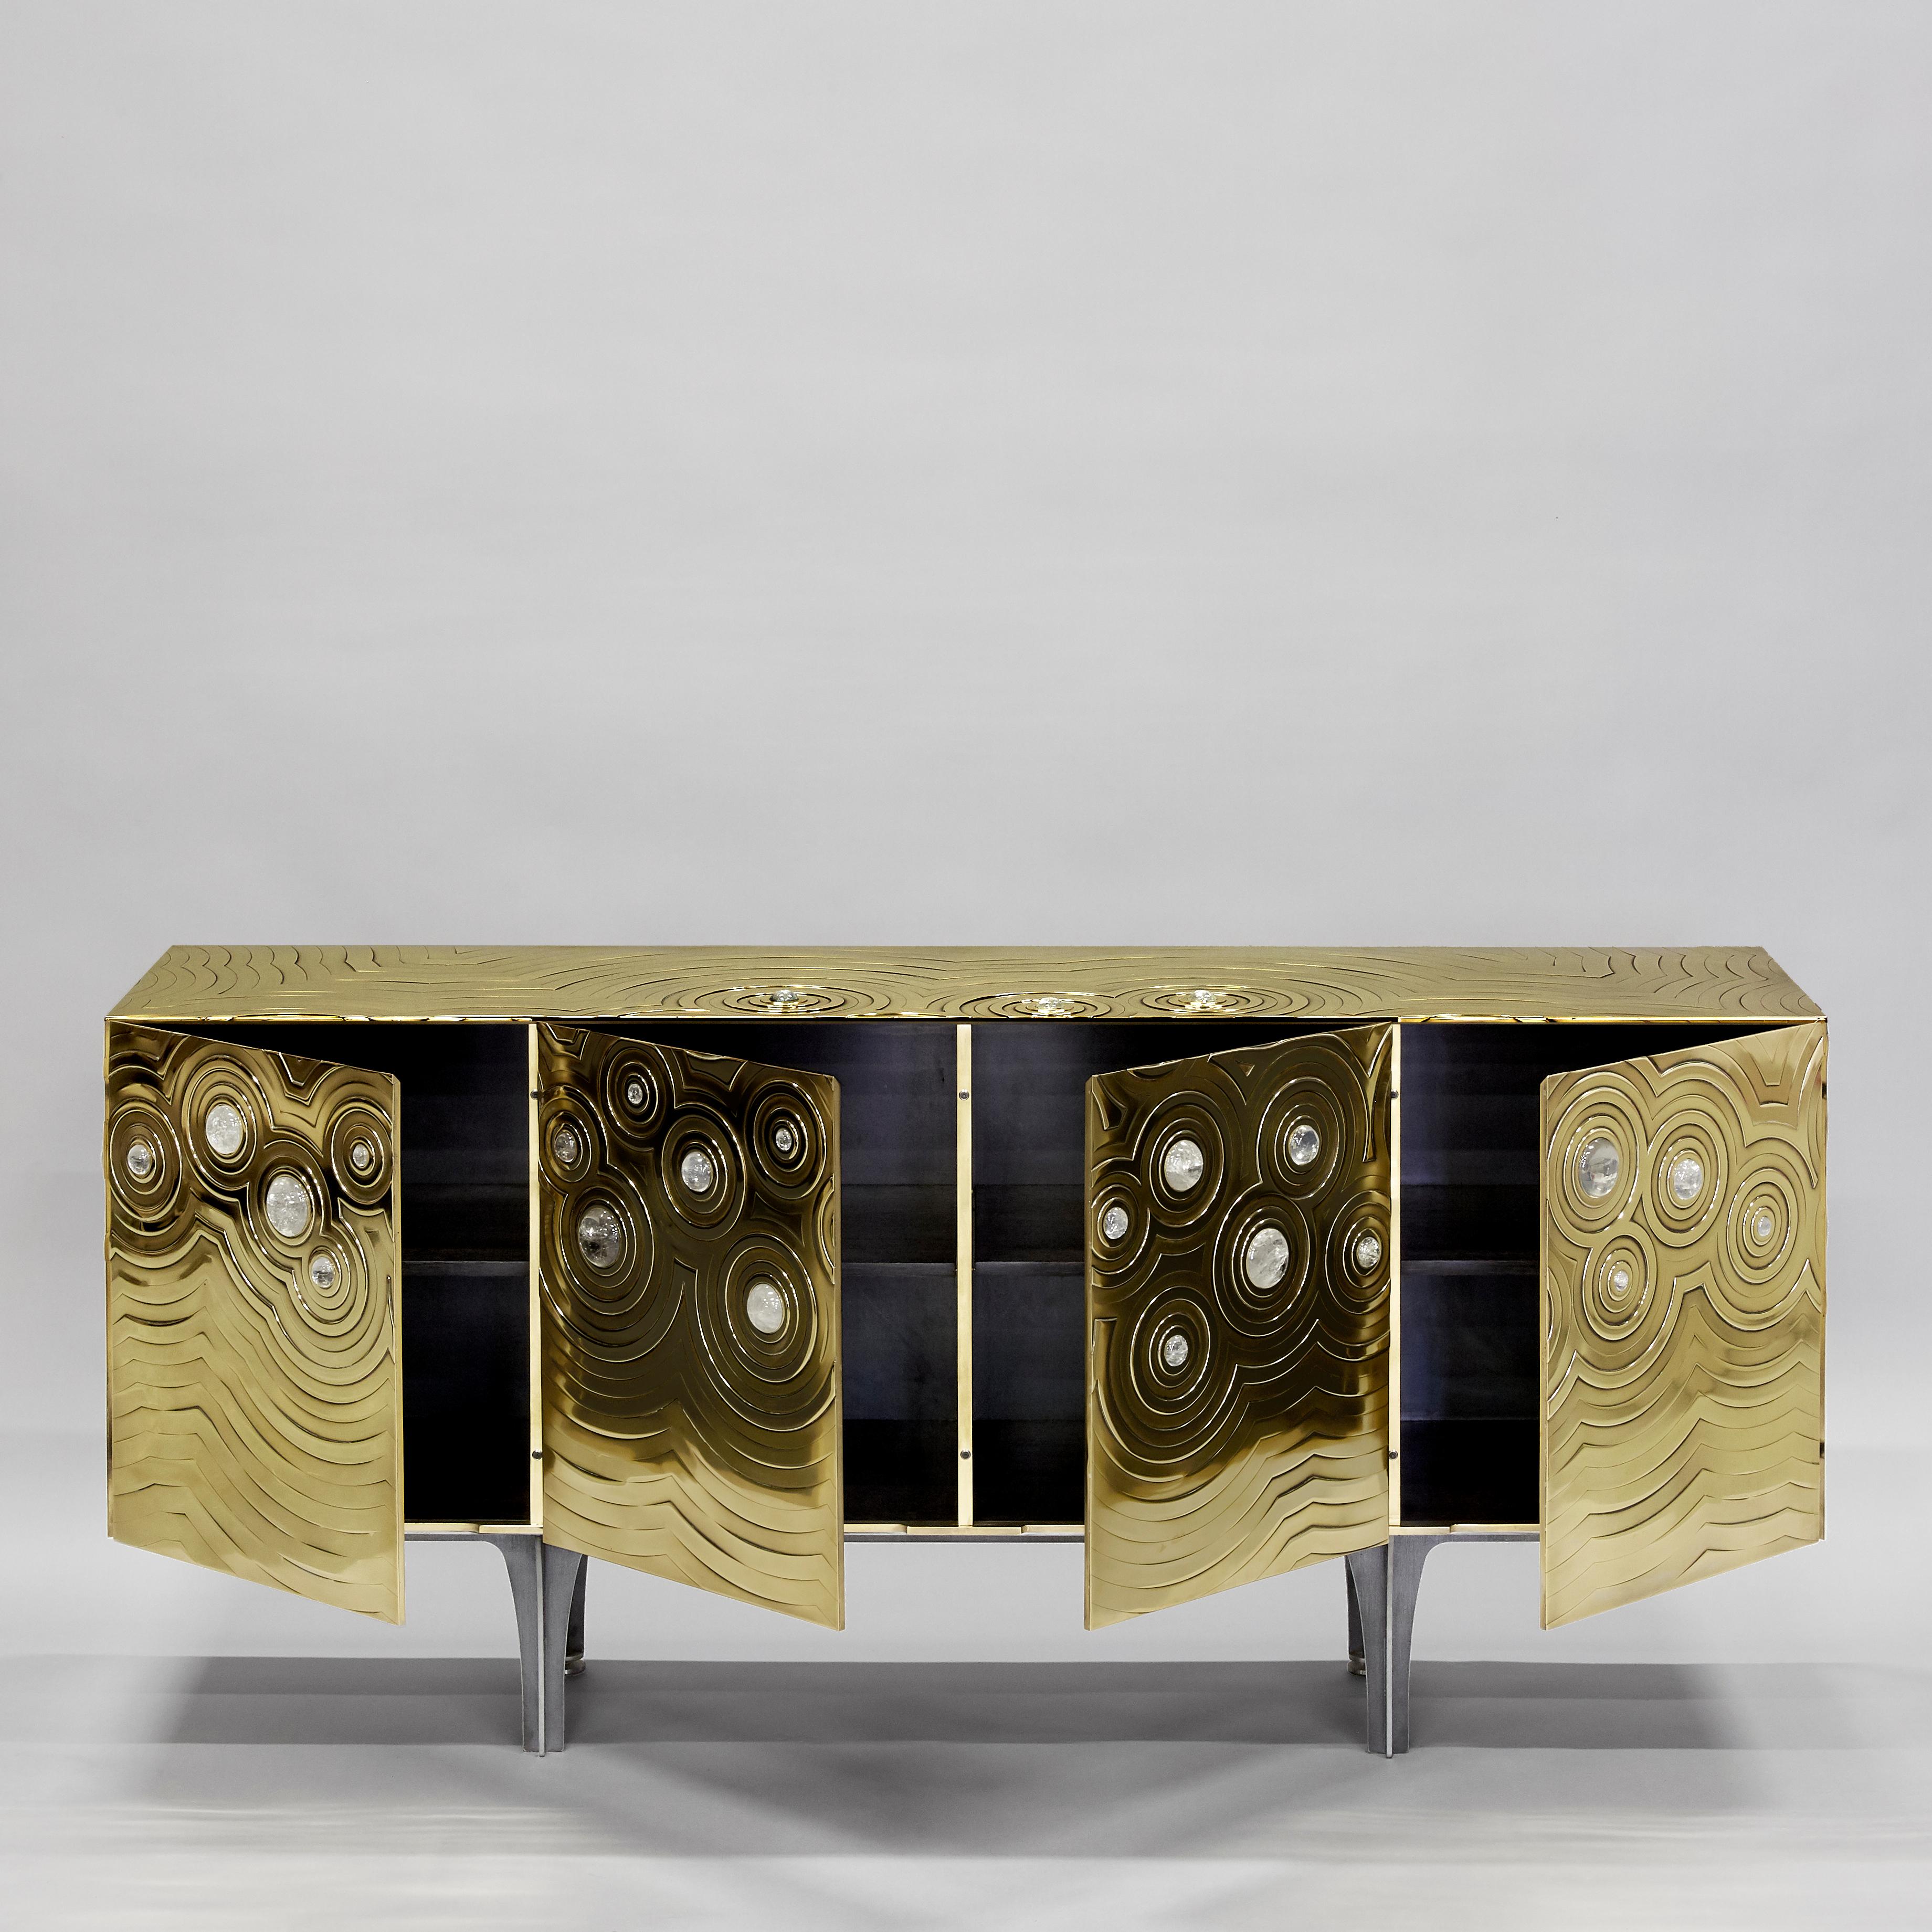 Modern Brass, Wood & Black Steel Roepa Sideboard with Inlaid Rock Crystals, Atelier EB